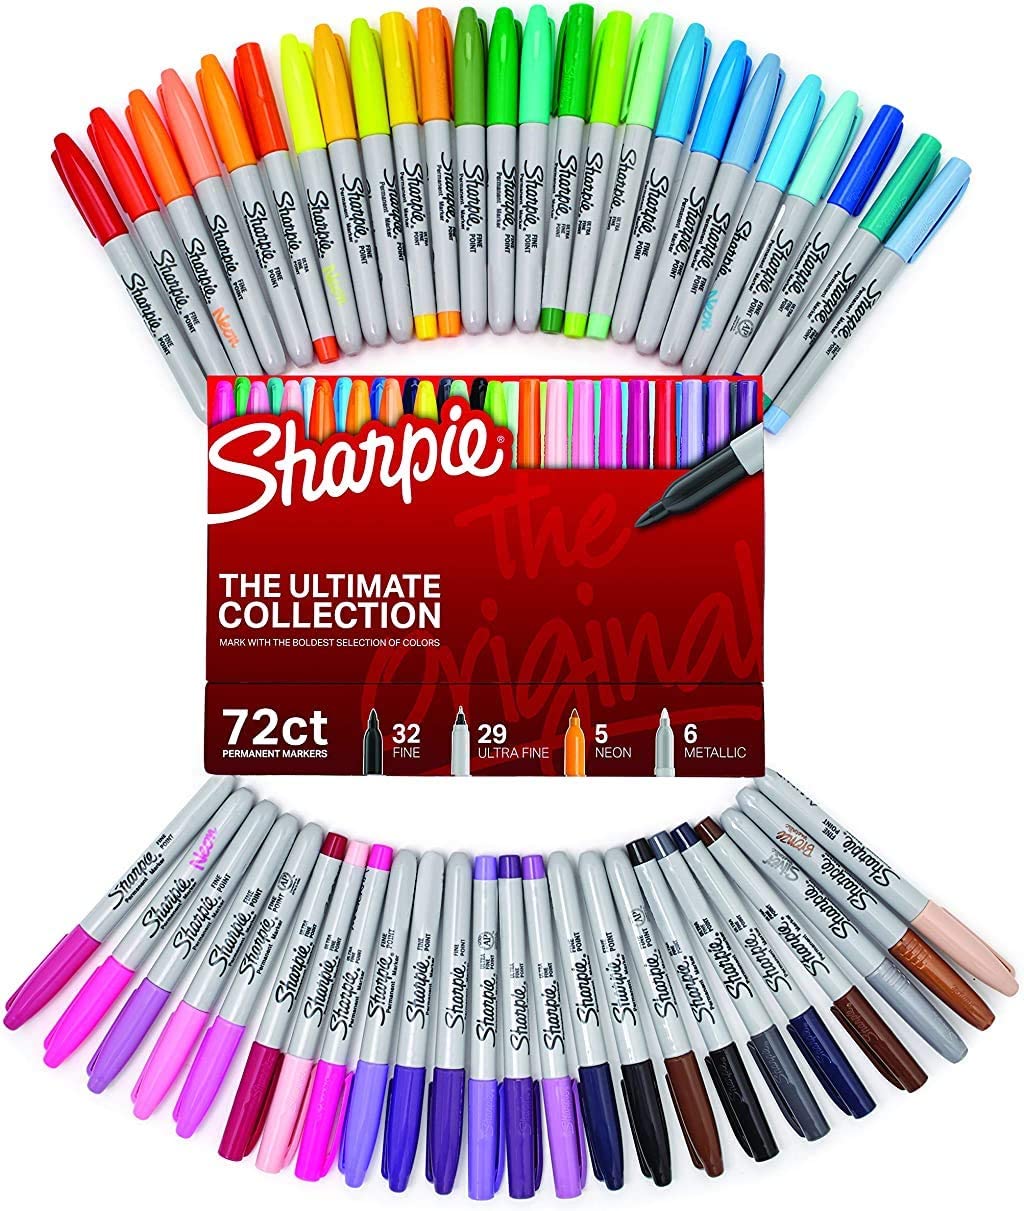 Sharpie The Ultimate Collection